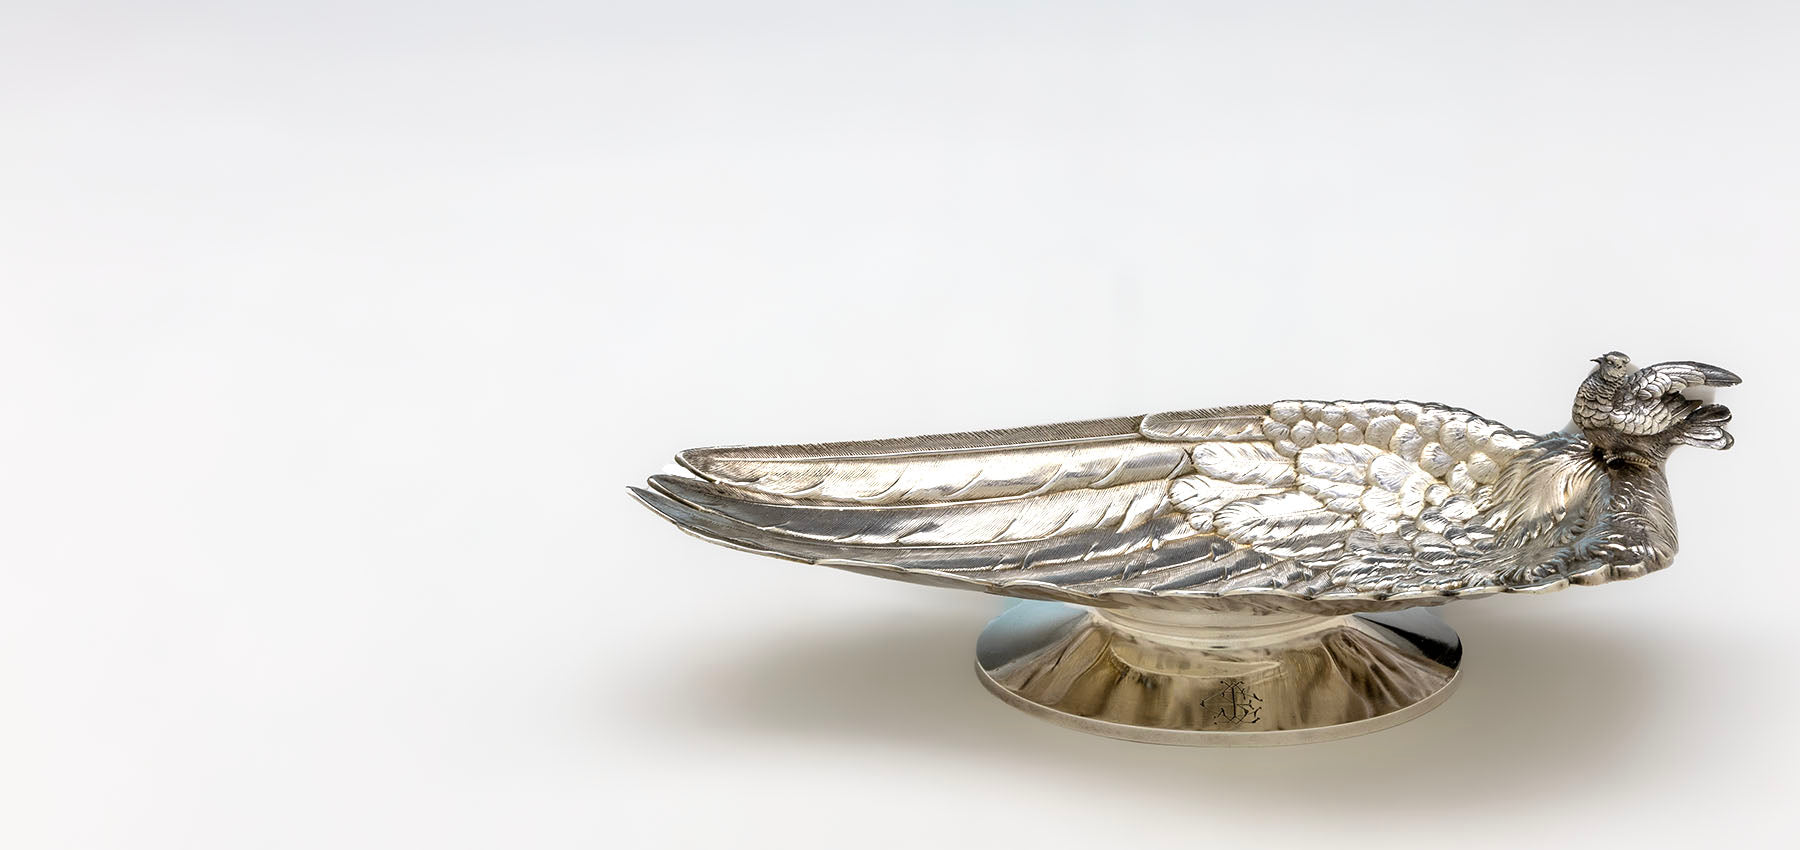 Whiting Antique Sterling Silver Figural Bird Dish, New York City, c. 1870s